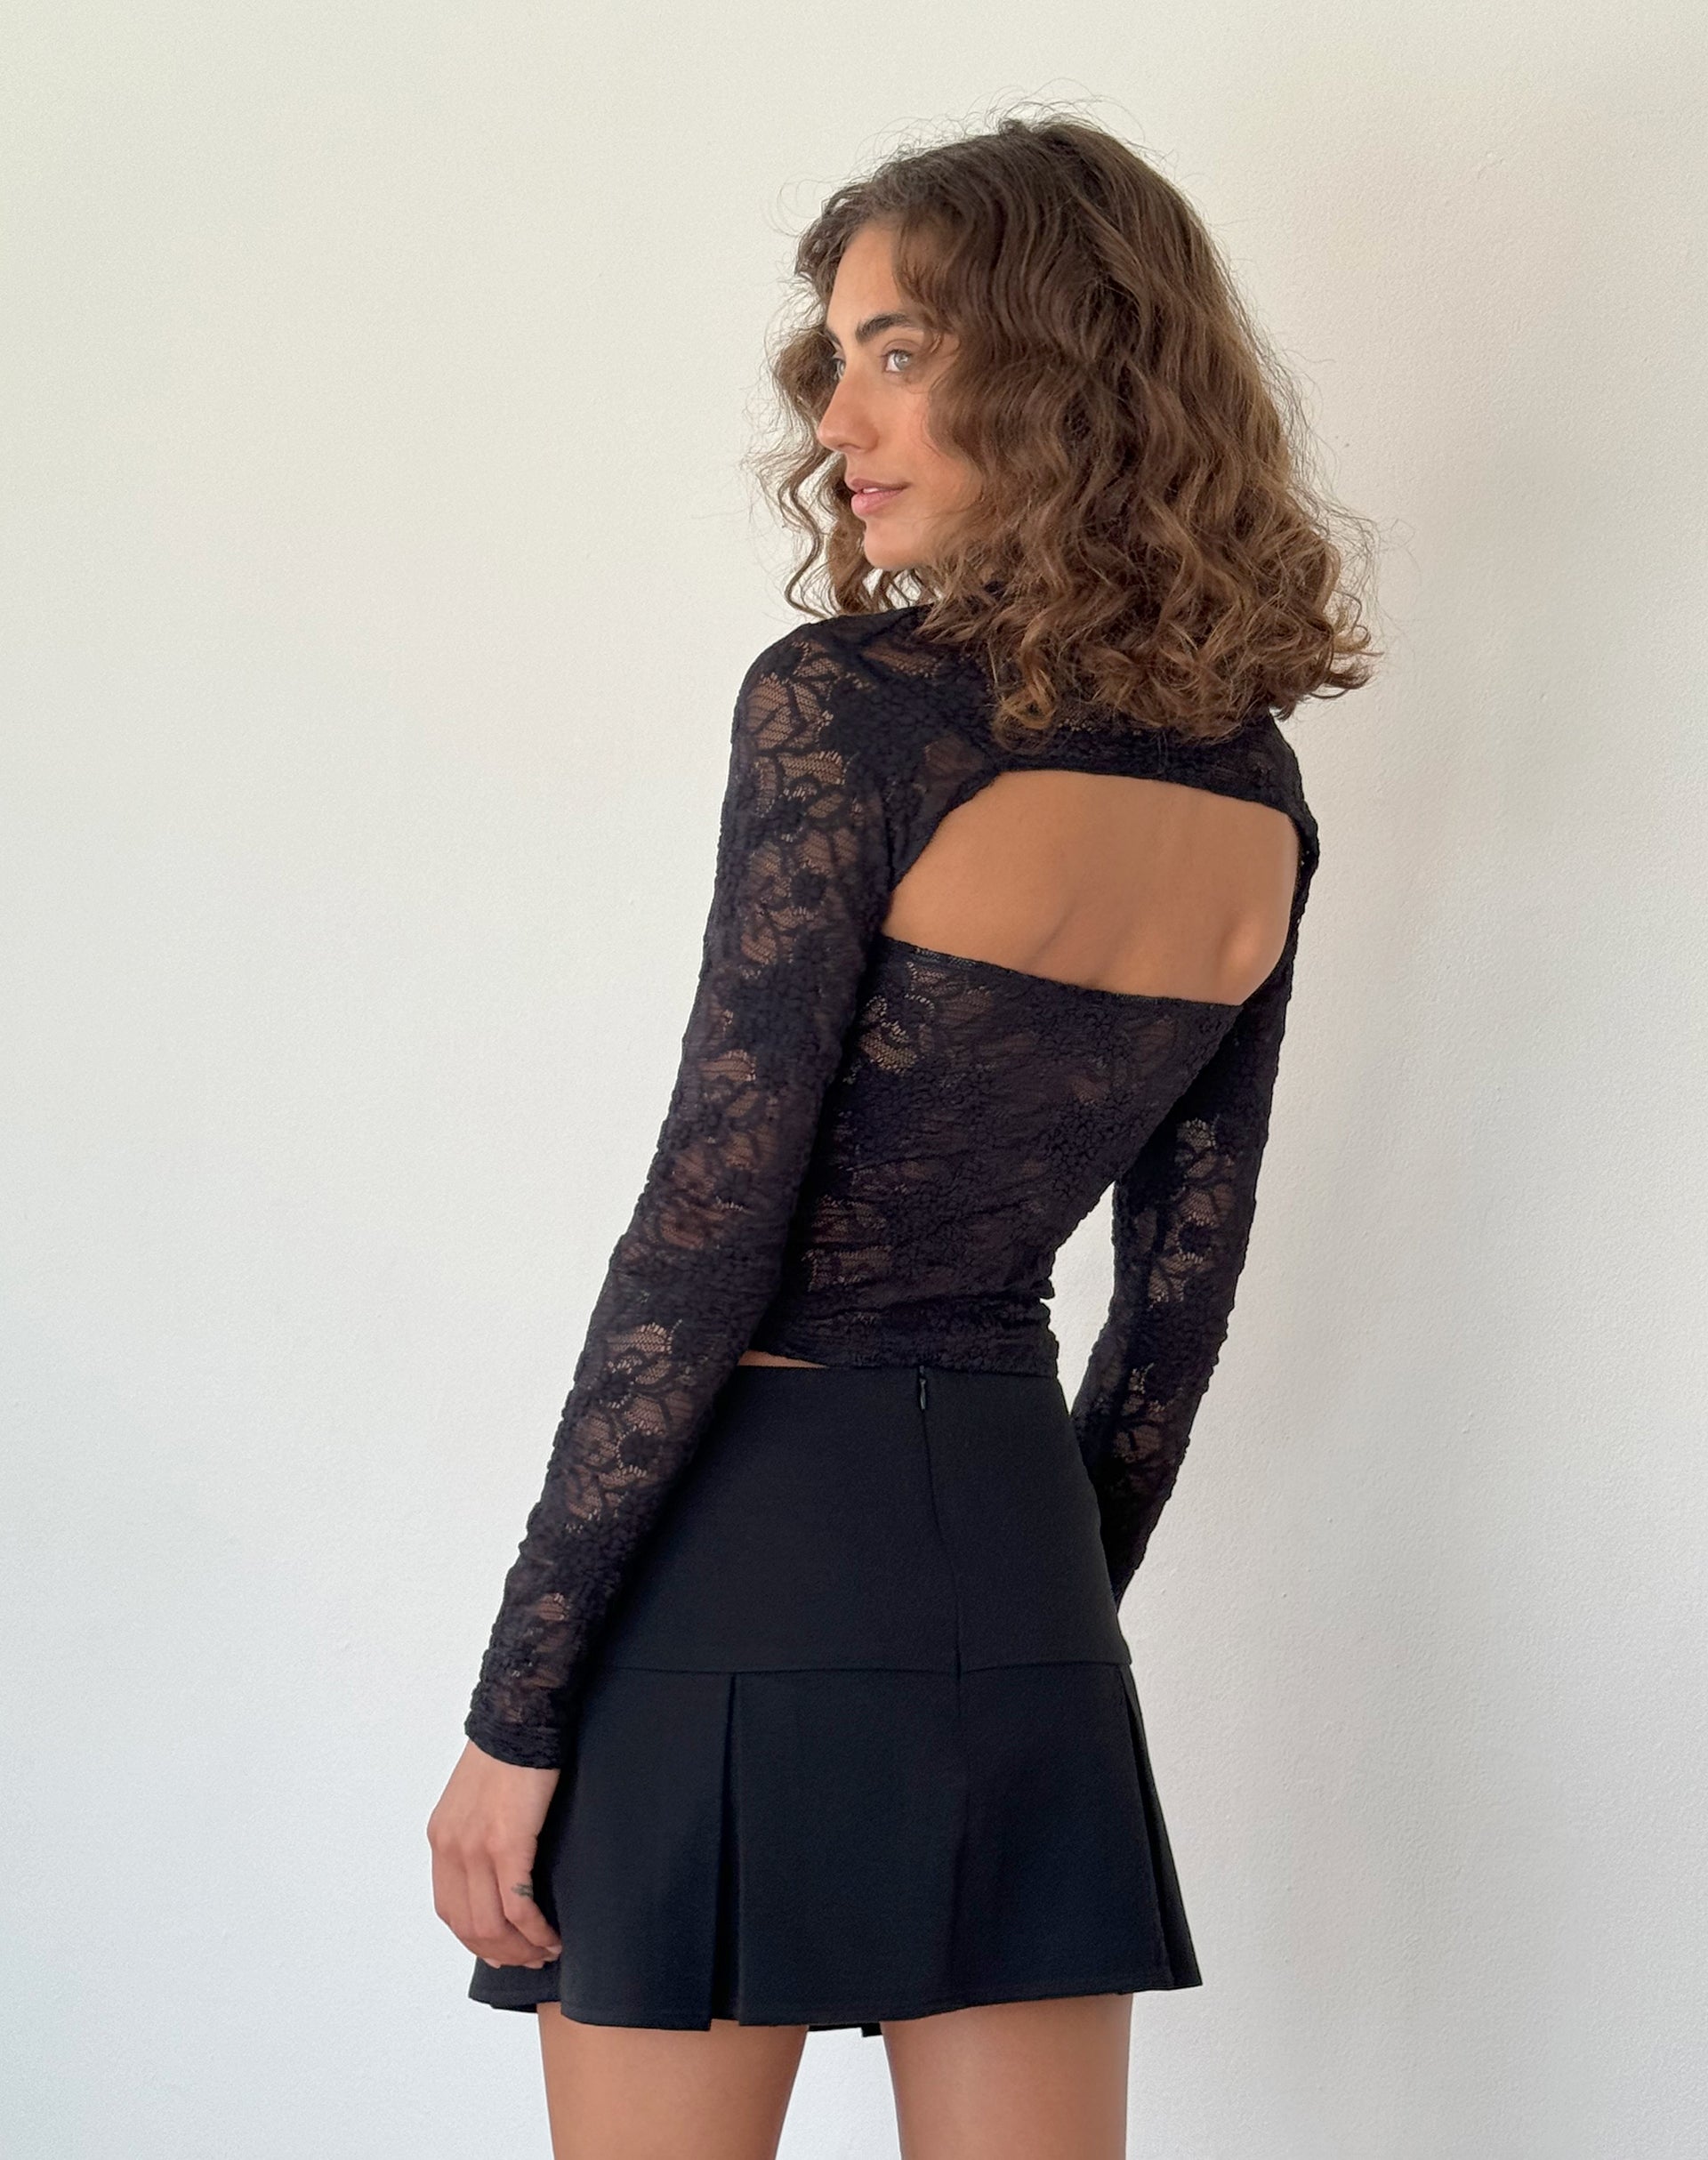 Image of Melvina Bandeau Top and Shrug Set in Lace Black